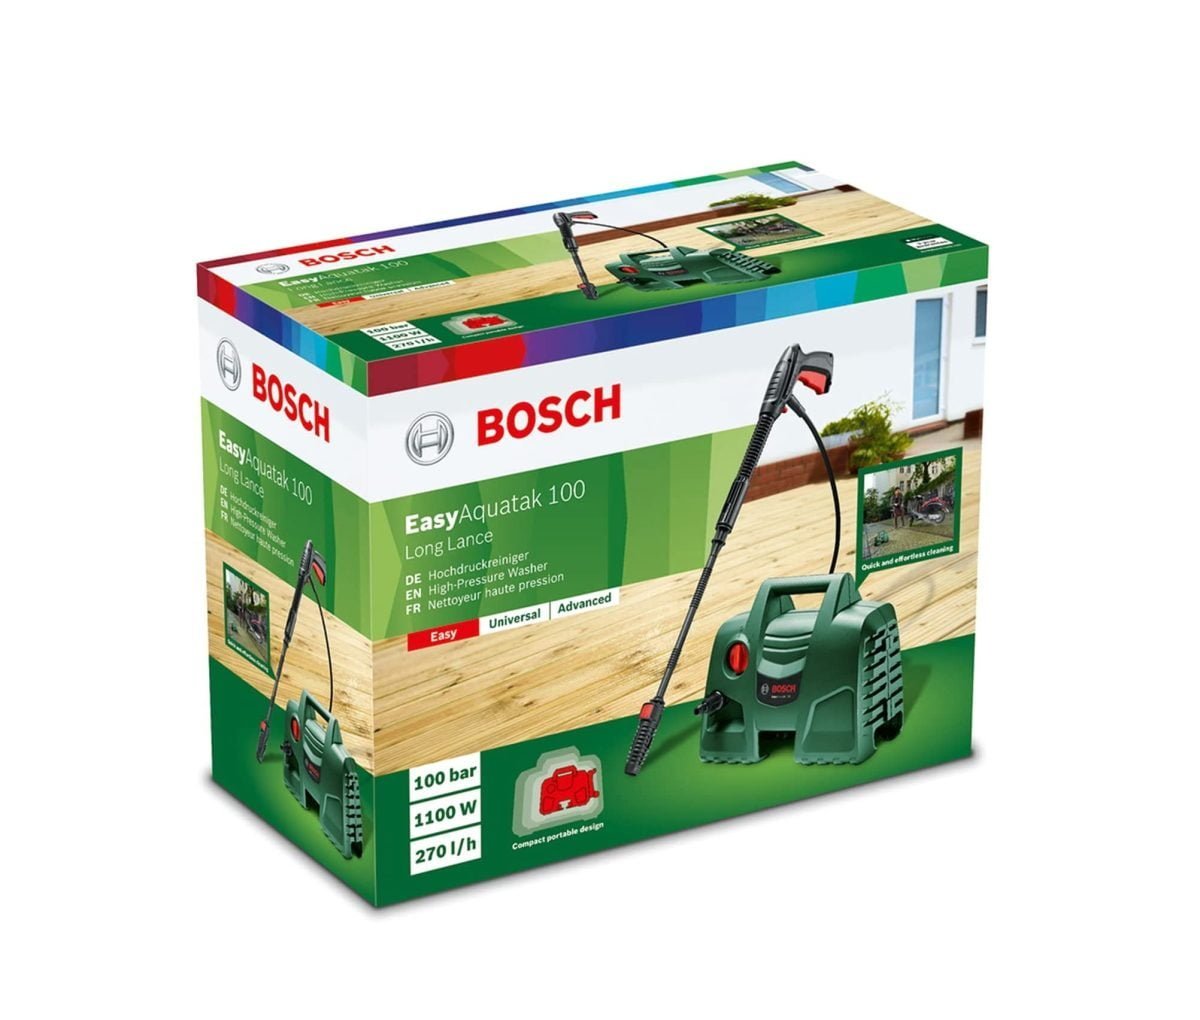 71Mmapy5El. Ac Sl1500 Bosch &Lt;H1 Class=&Quot;Product-Title&Quot;&Gt;Bosch Easyaquatak 100 Long Lance Pressure Washer (1200 W) 100 Bar&Lt;/H1&Gt; &Lt;Div Class=&Quot;Col-Sm-6 Col-Md-12&Quot;&Gt; &Lt;Div Class=&Quot;O-Pthg-Productstage__Product-Summary H6&Quot;&Gt; &Lt;Div Class=&Quot;O-Pthg-Productstage__Product-Summary H6&Quot;&Gt;Compact And Quick For Effortless Cleaning Performance&Lt;/Div&Gt; &Lt;Ul Class=&Quot;A-List A-List--Unordered&Quot;&Gt; &Lt;Li Class=&Quot;A-List__Item&Quot;&Gt; &Lt;Div Class=&Quot;A-Text-Richtext&Quot;&Gt;Compact Design Allows Easy Maneuverability For Quick Cleaning Job&Lt;/Div&Gt;&Lt;/Li&Gt; &Lt;Li Class=&Quot;A-List__Item&Quot;&Gt; &Lt;Div Class=&Quot;A-Text-Richtext&Quot;&Gt;Adjustable Nozzle – From A Forceful Jet To Gentle Rinsing&Lt;/Div&Gt;&Lt;/Li&Gt; &Lt;Li Class=&Quot;A-List__Item&Quot;&Gt; &Lt;Div Class=&Quot;A-Text-Richtext&Quot;&Gt;Push-Fit Connections For Ultimate Convenience&Lt;/Div&Gt;&Lt;/Li&Gt; &Lt;Li Class=&Quot;A-List__Item&Quot;&Gt; &Lt;Div Class=&Quot;A-Text-Richtext&Quot;&Gt;Easily Tackle Small-To-Medium-Sized Cleaning Tasks&Lt;/Div&Gt;&Lt;/Li&Gt; &Lt;/Ul&Gt; Model 00600 8A7 E71 Is &Lt;/Div&Gt; &Lt;/Div&Gt; Bosch Easyaquatak 100 Bosch Easyaquatak 100 Long Lance Pressure Washer (1200 W) 100 Bar